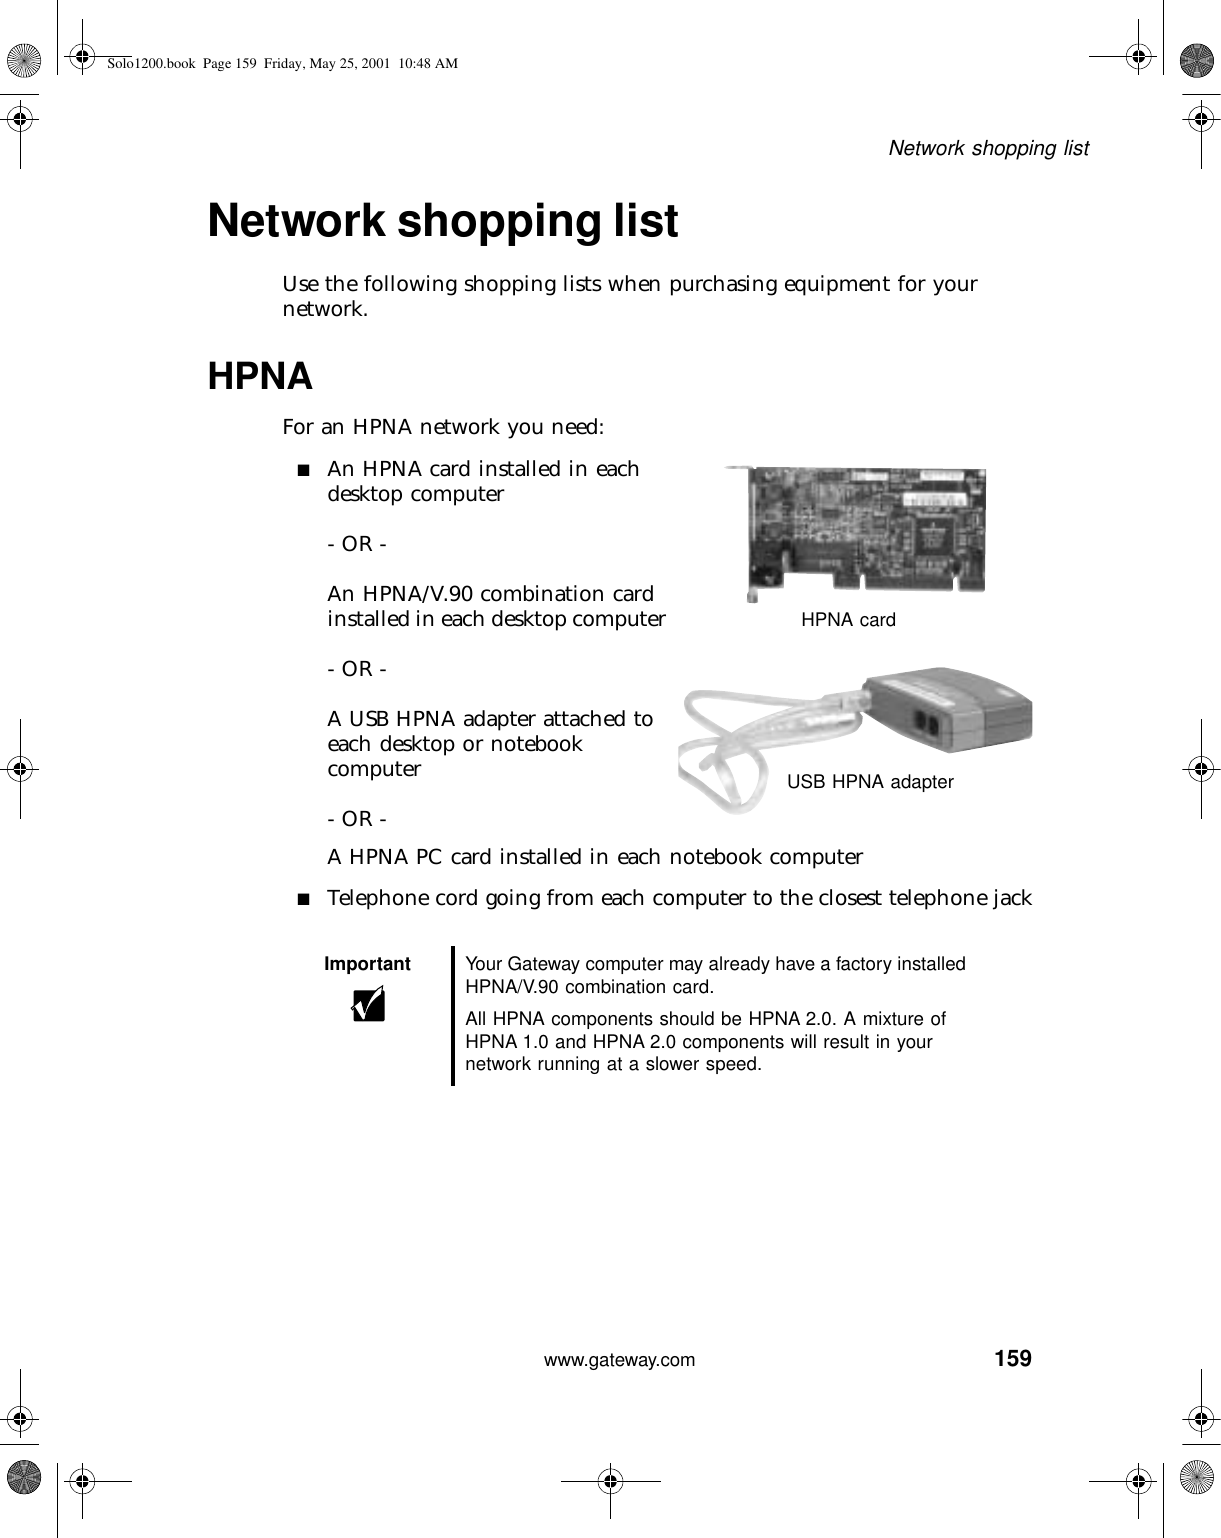 159Network shopping listwww.gateway.comNetwork shopping listUse the following shopping lists when purchasing equipment for your network.HPNAFor an HPNA network you need:■An HPNA card installed in each desktop computer- OR -An HPNA/V.90 combination card installed in each desktop computer- OR -A USB HPNA adapter attached to each desktop or notebook computer- OR -A HPNA PC card installed in each notebook computer■Telephone cord going from each computer to the closest telephone jackImportant Your Gateway computer may already have a factory installed HPNA/V.90 combination card.All HPNA components should be HPNA 2.0. A mixture of HPNA 1.0 and HPNA 2.0 components will result in your network running at a slower speed.HPNA cardUSB HPNA adapterSolo1200.book Page 159 Friday, May 25, 2001 10:48 AM